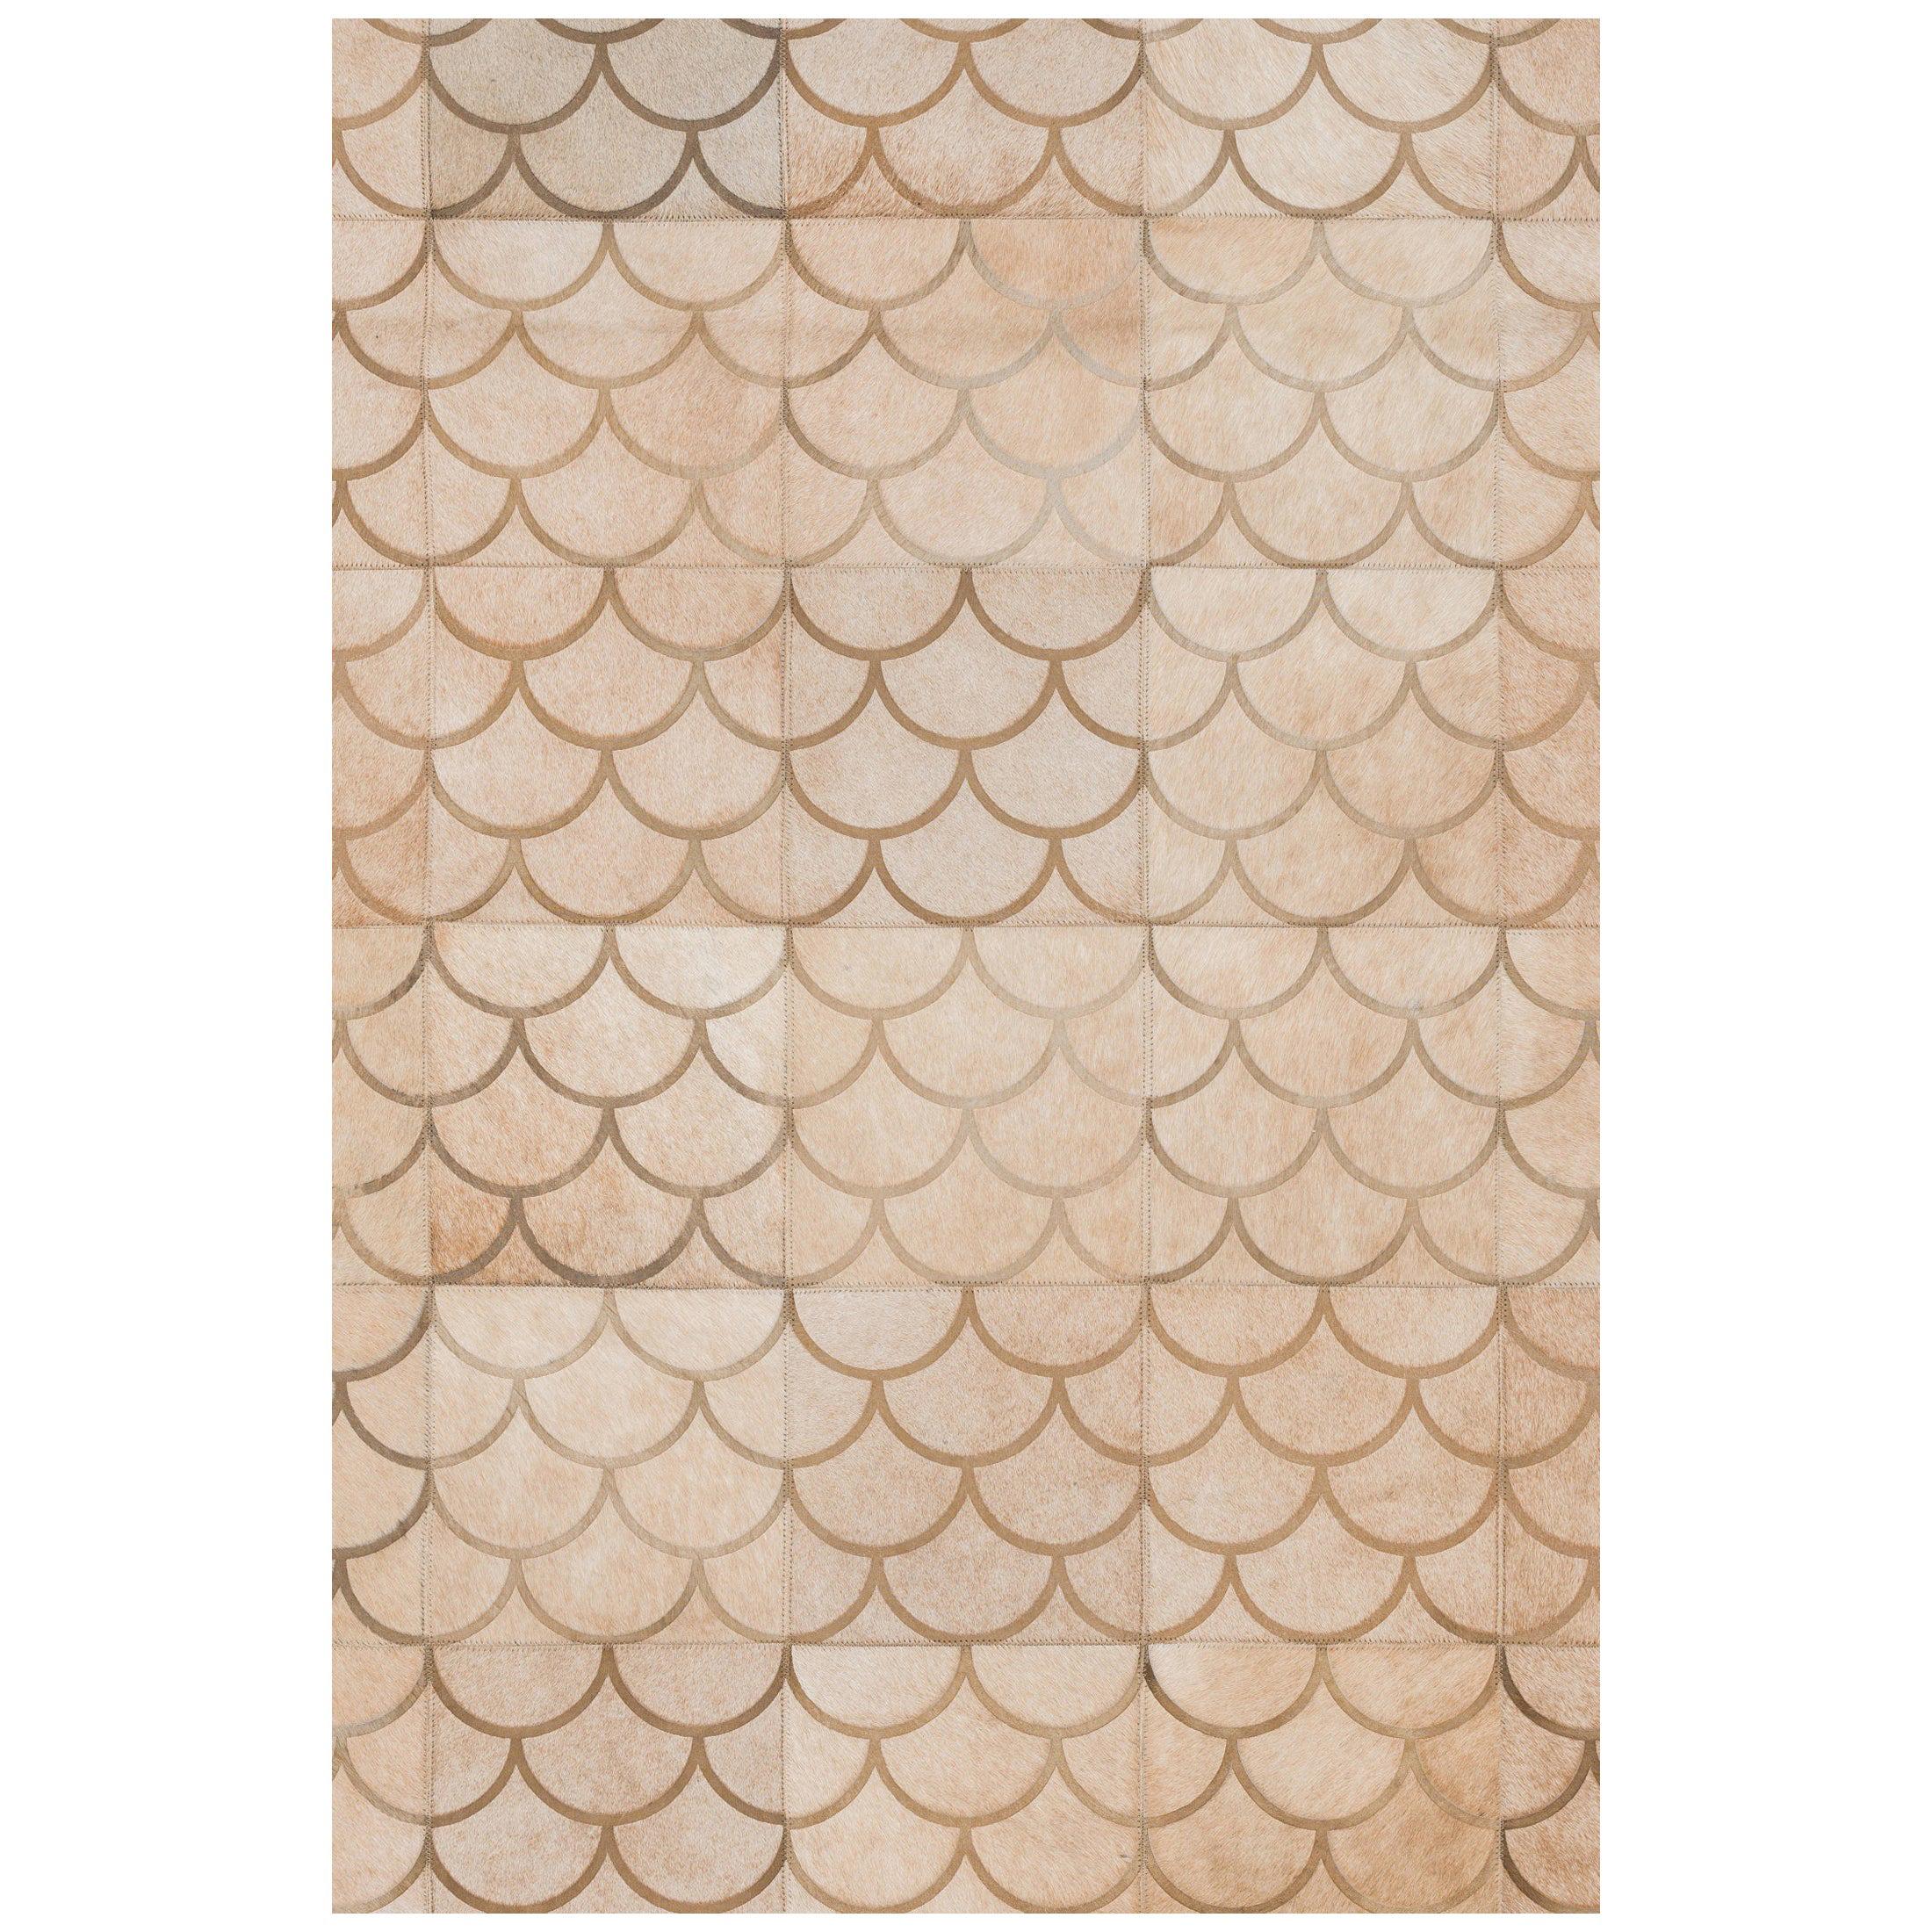 Modern Scallop crescent pattern Customizable Luneta Cowhide Area Floor Rug Large For Sale